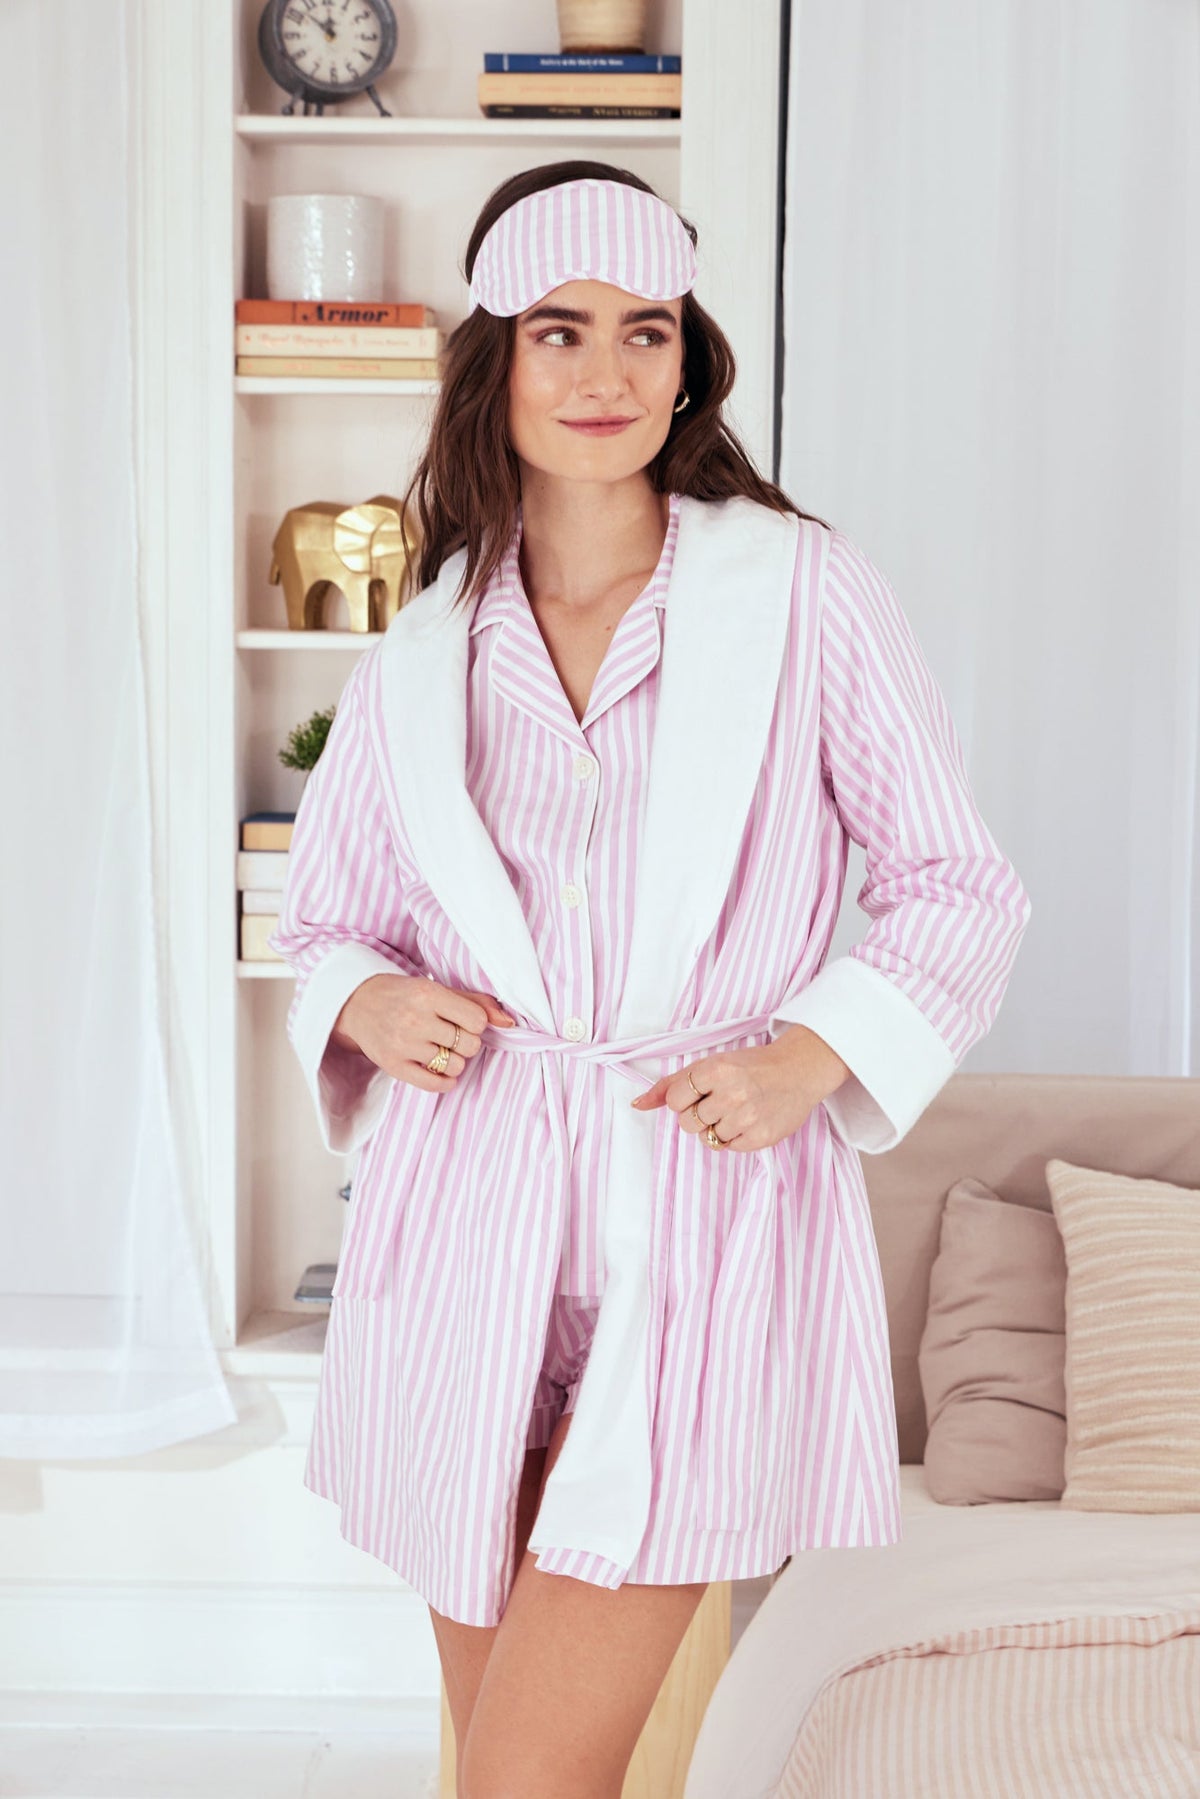 A lady wearing a pink and white stripes robe.